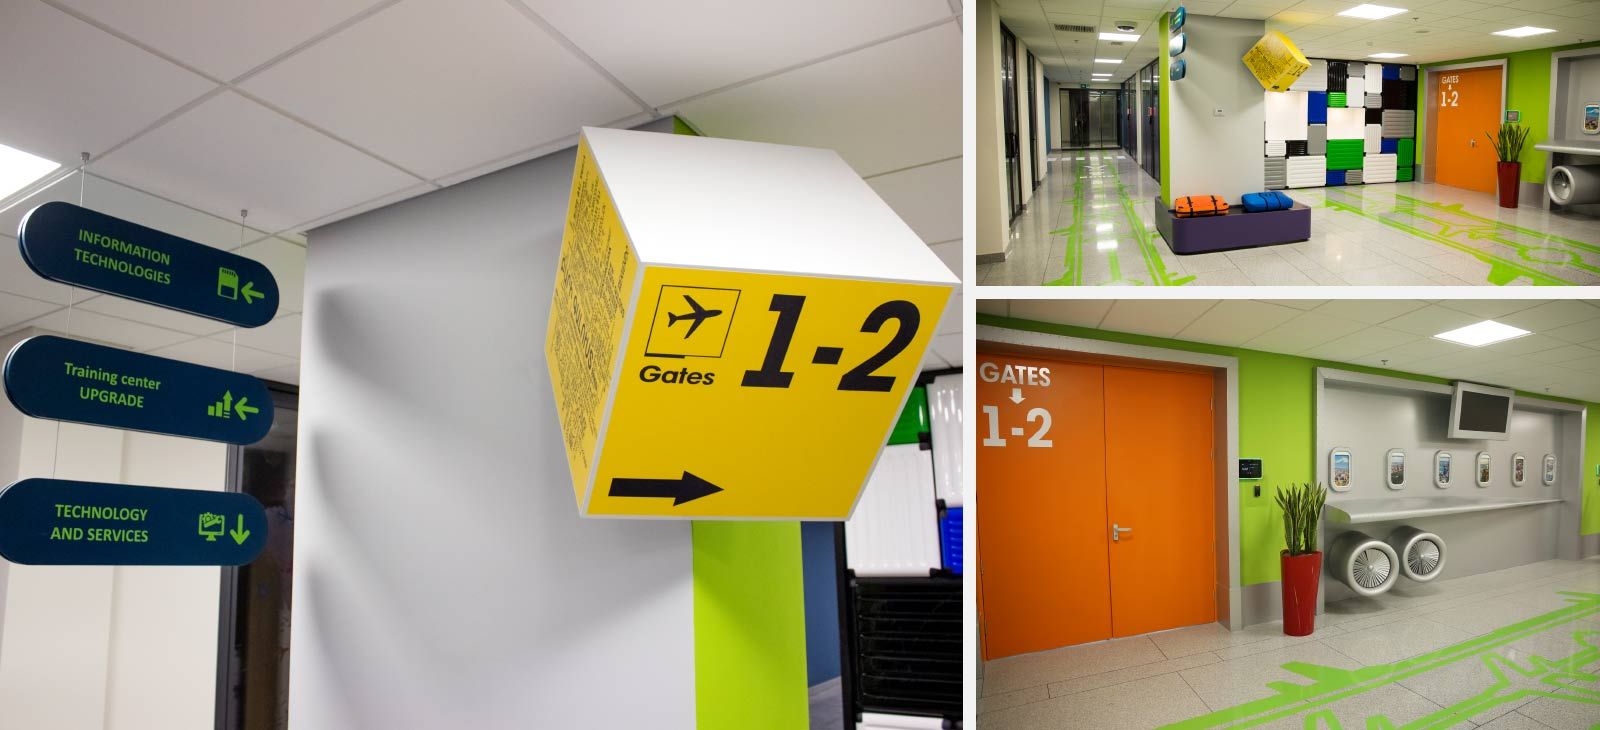 Creative wayfinding signage in the form of indoor colorful structures and adhesives